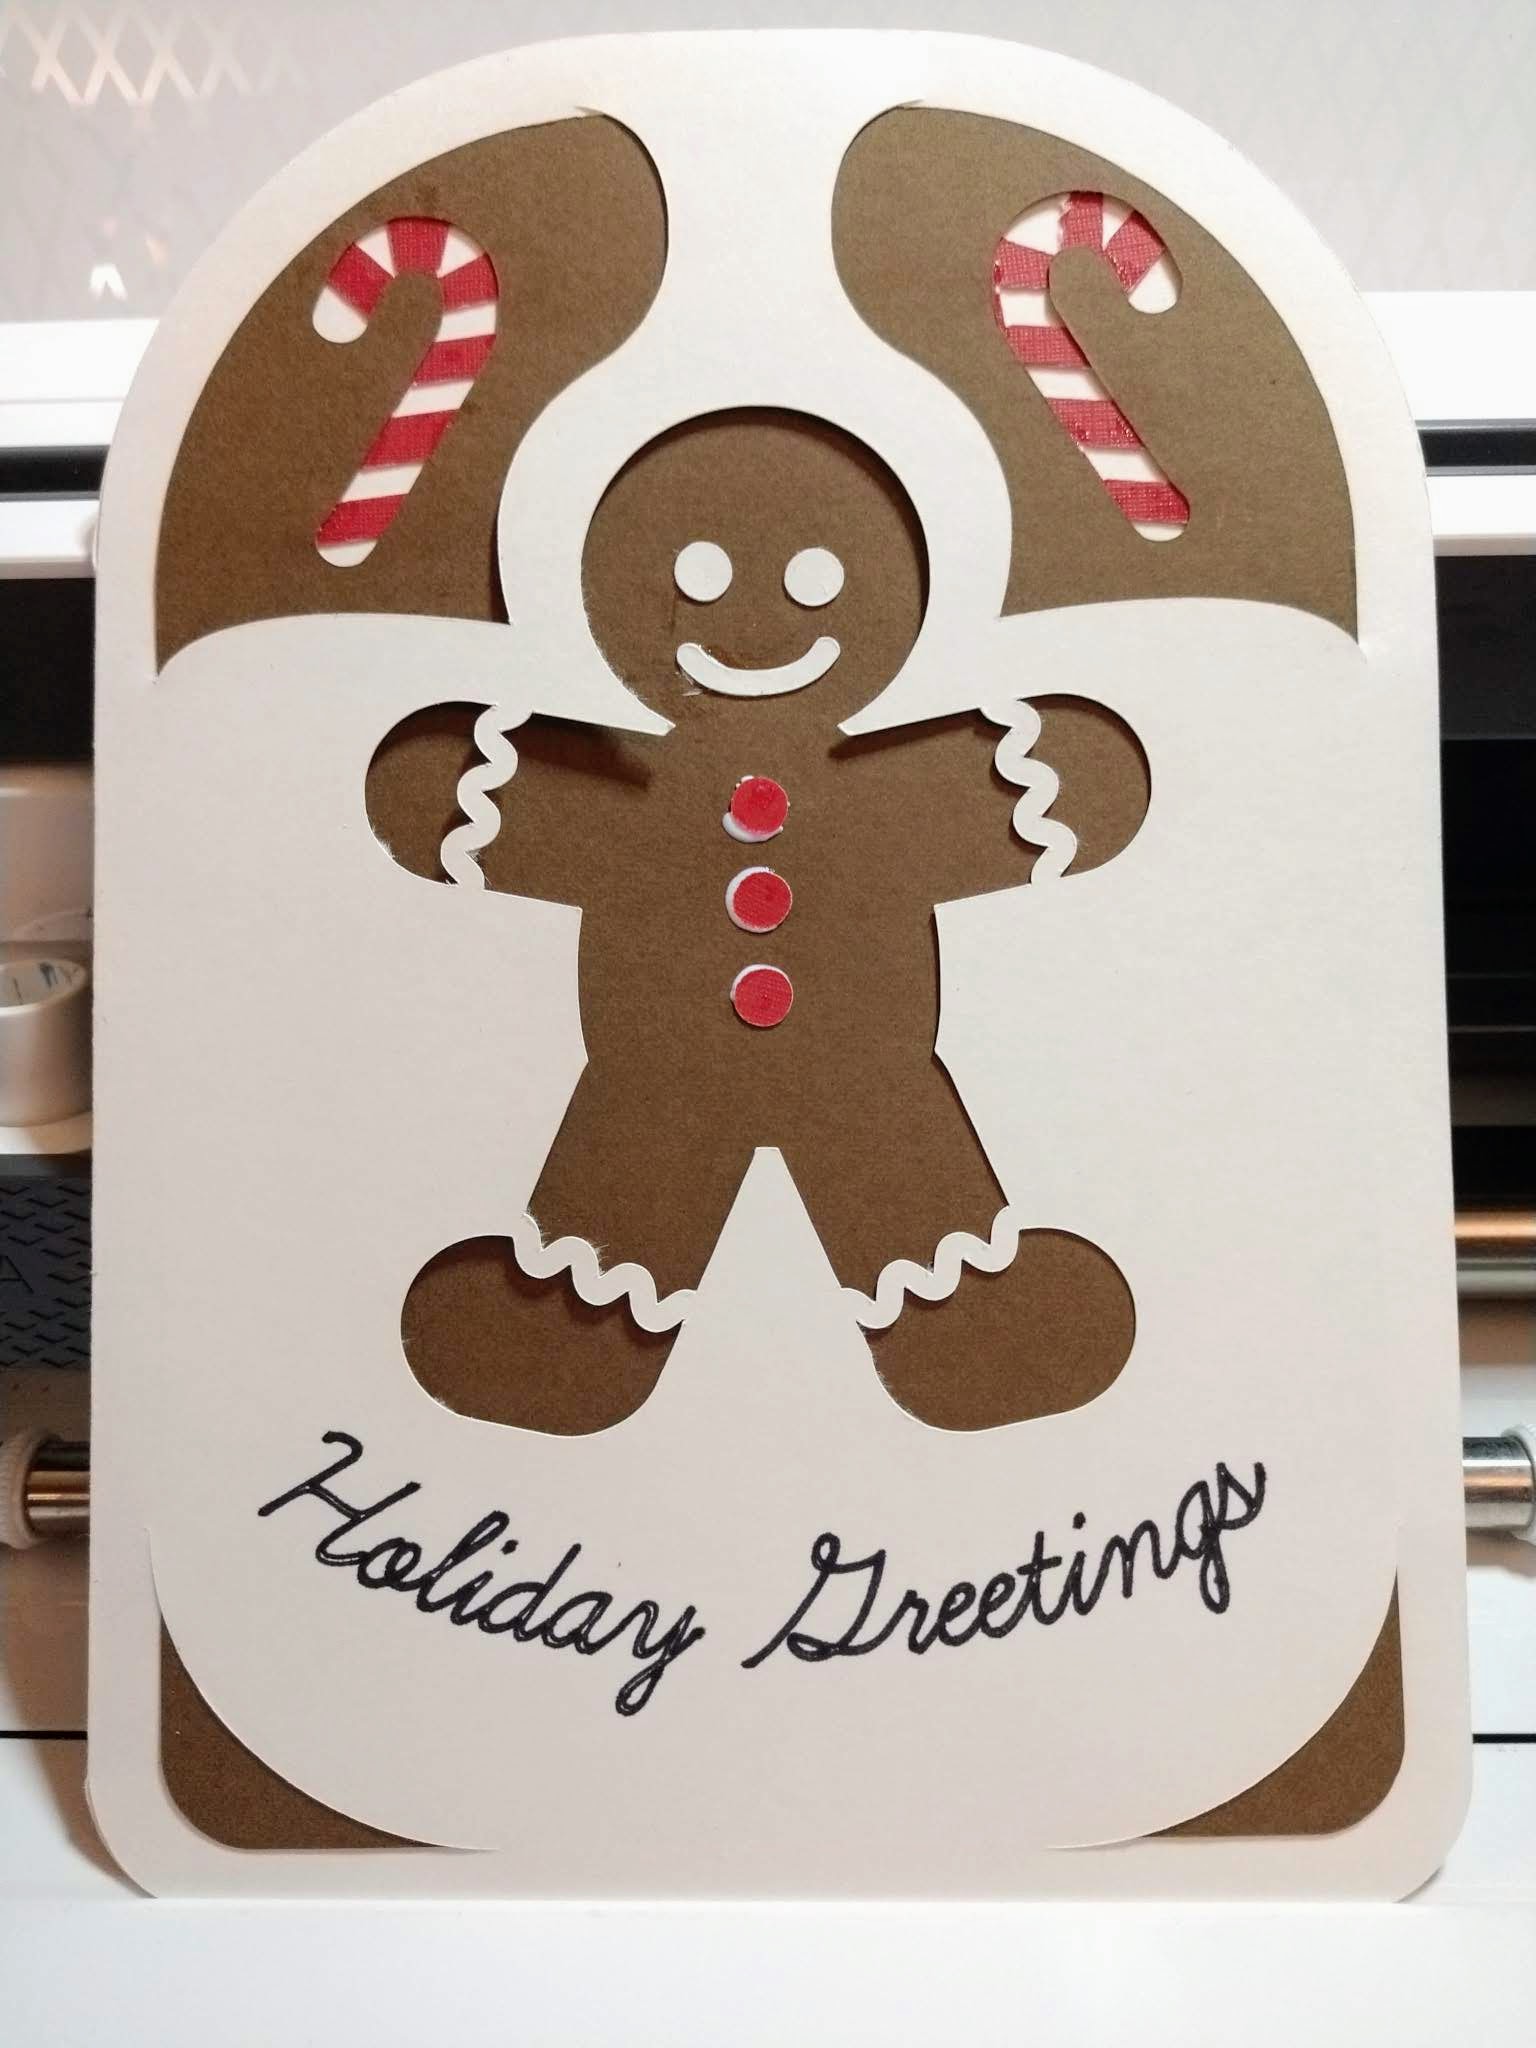 Gingerbread person